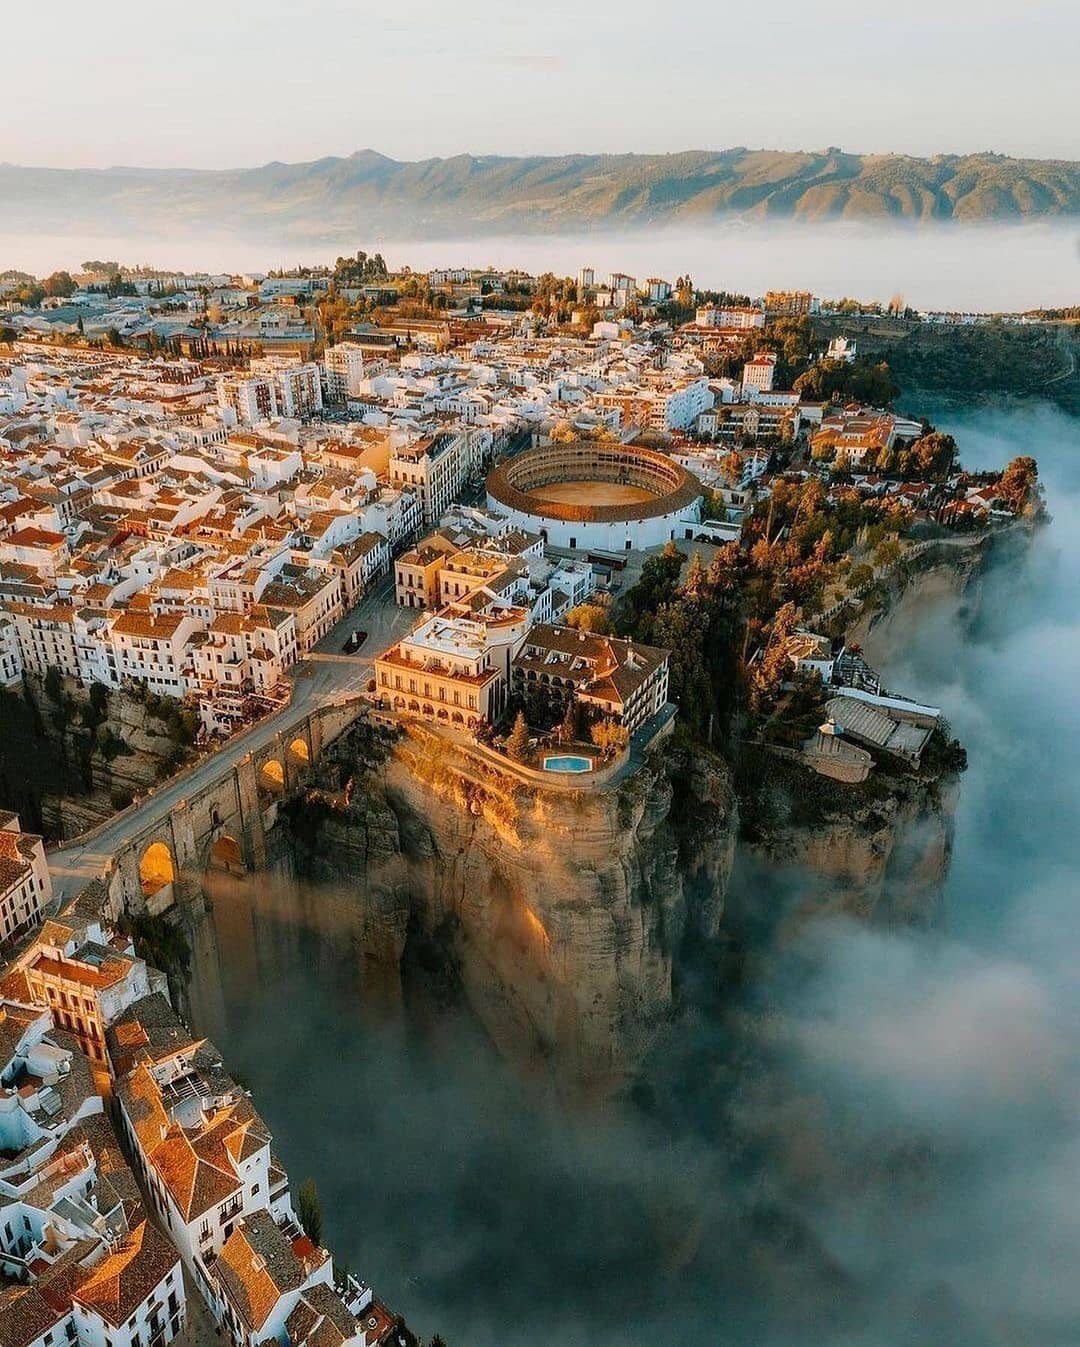 The town is located on the cliffs of Ronda in Spain.  Photo: @time2board